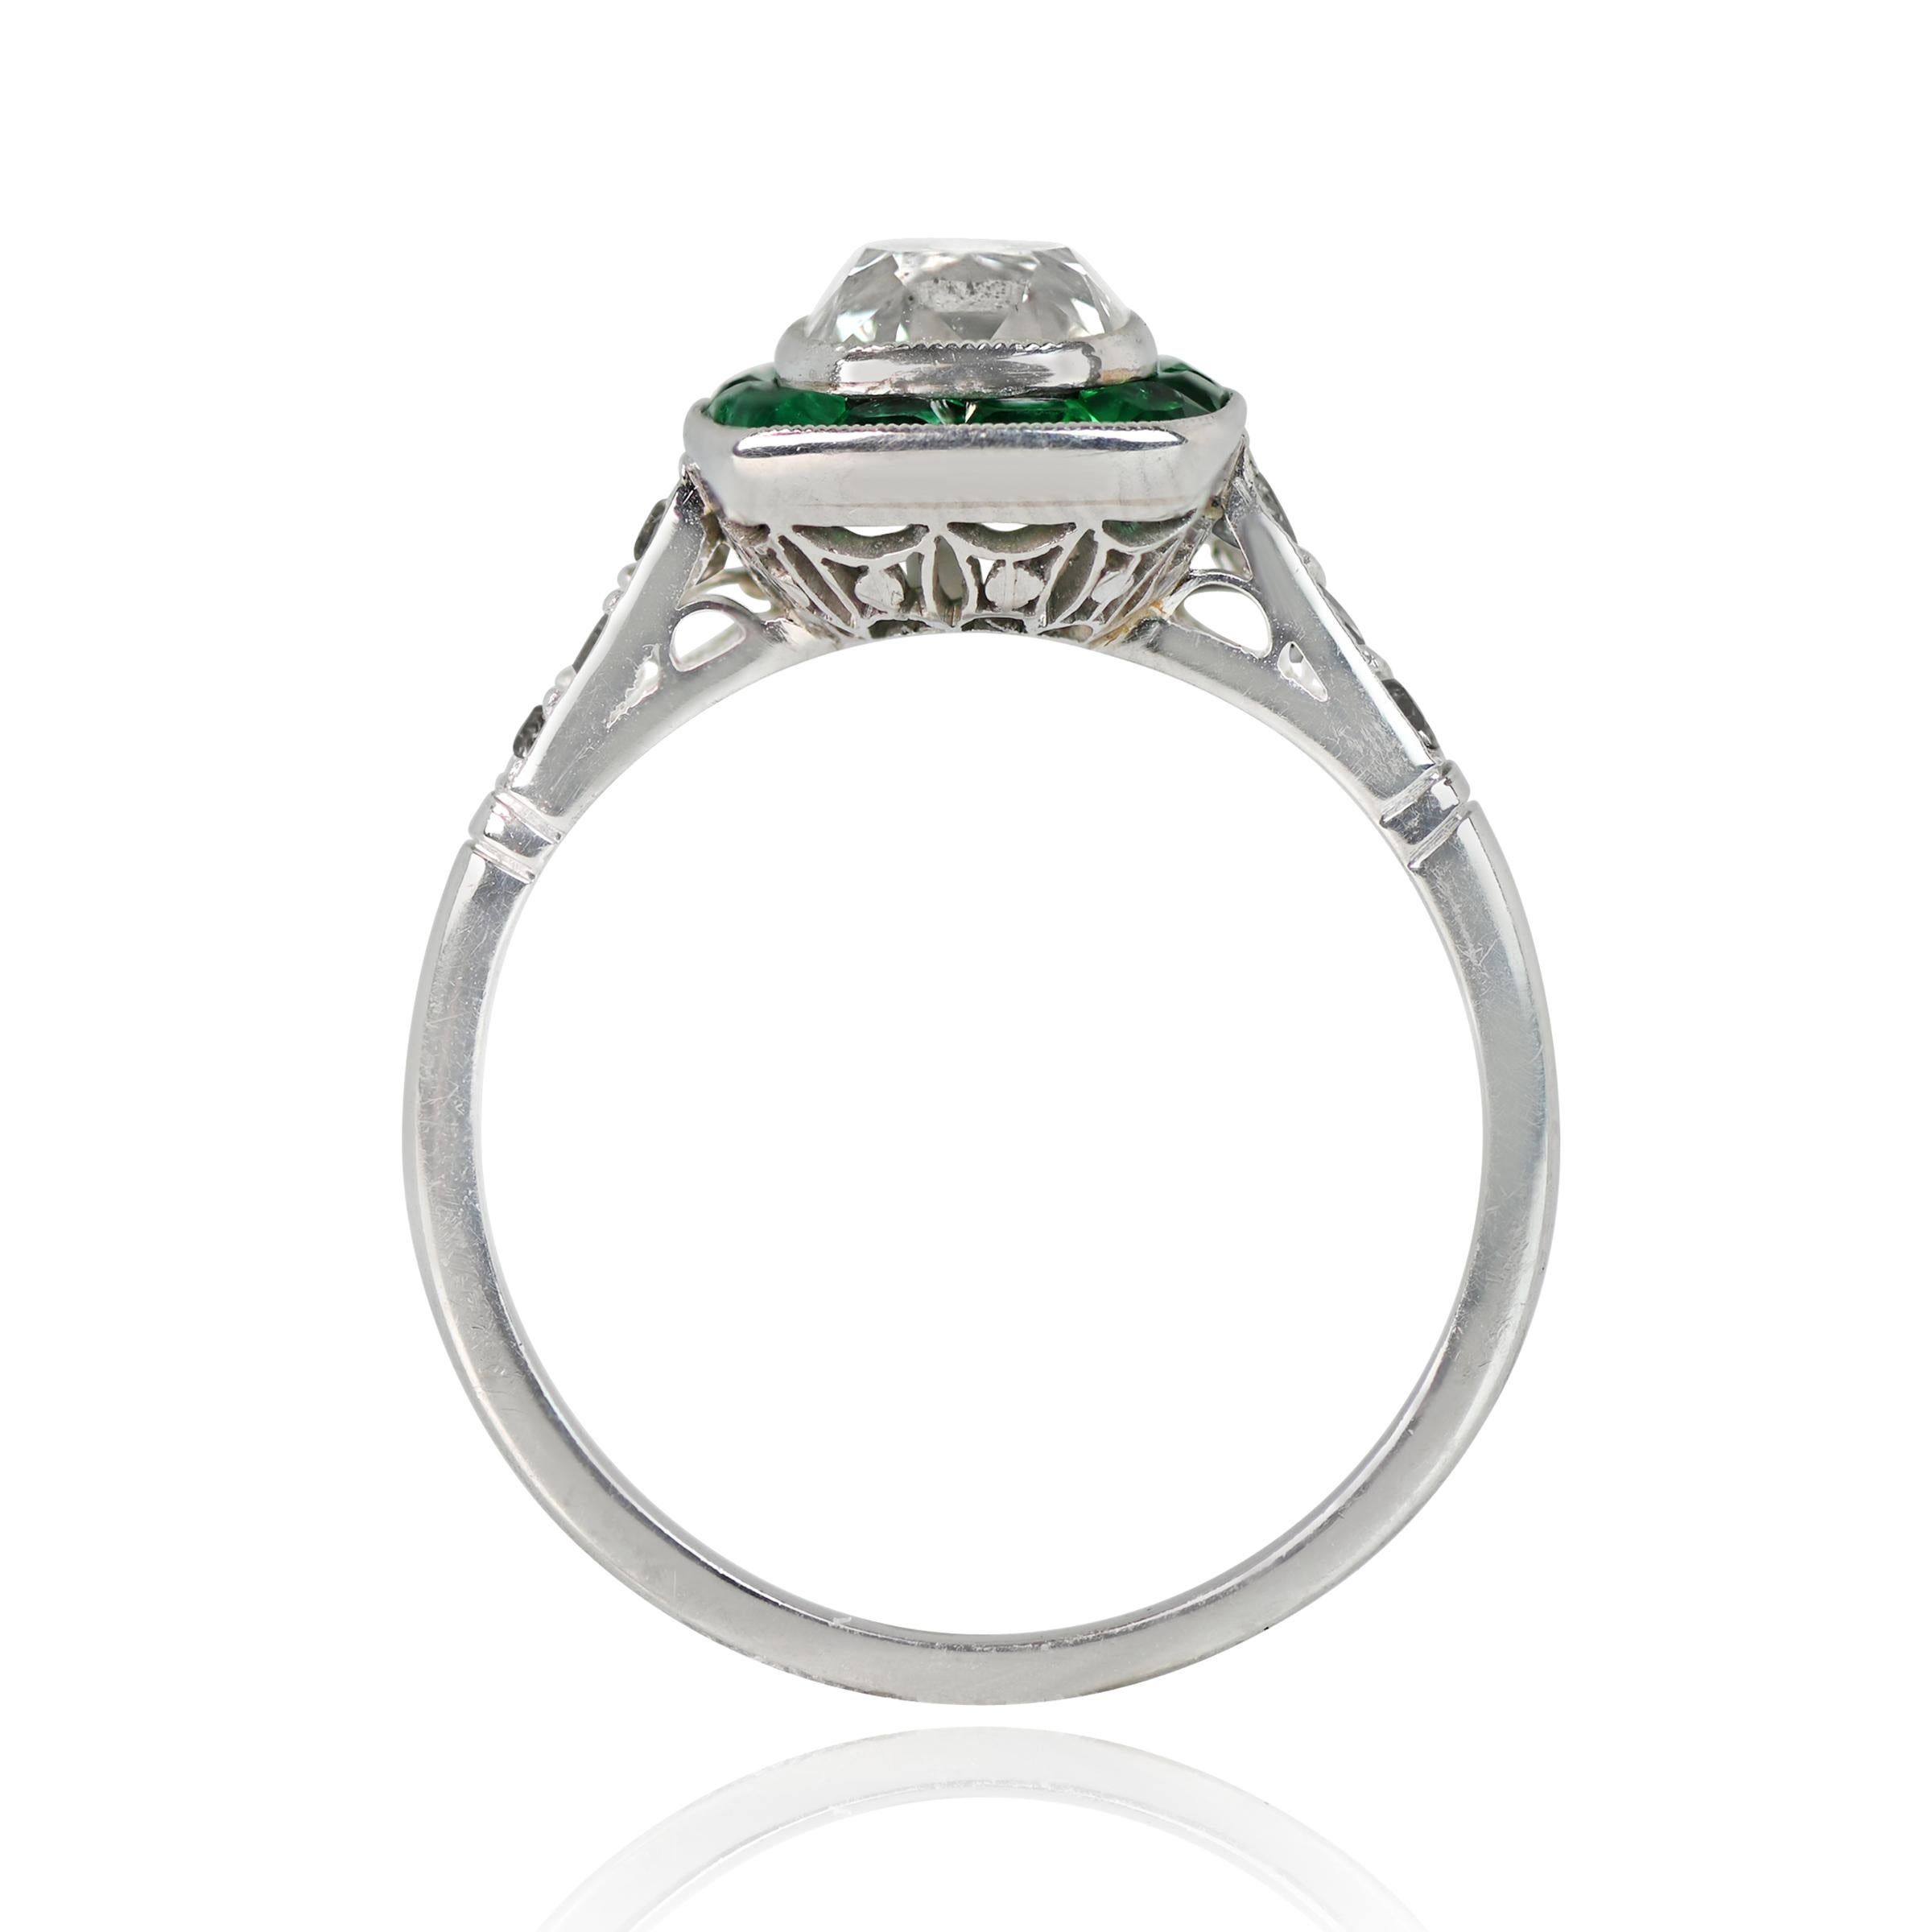 1.30ct Antique Cushion Cut Diamond Engagement Ring, Emerald Halo, Platinum In Excellent Condition For Sale In New York, NY